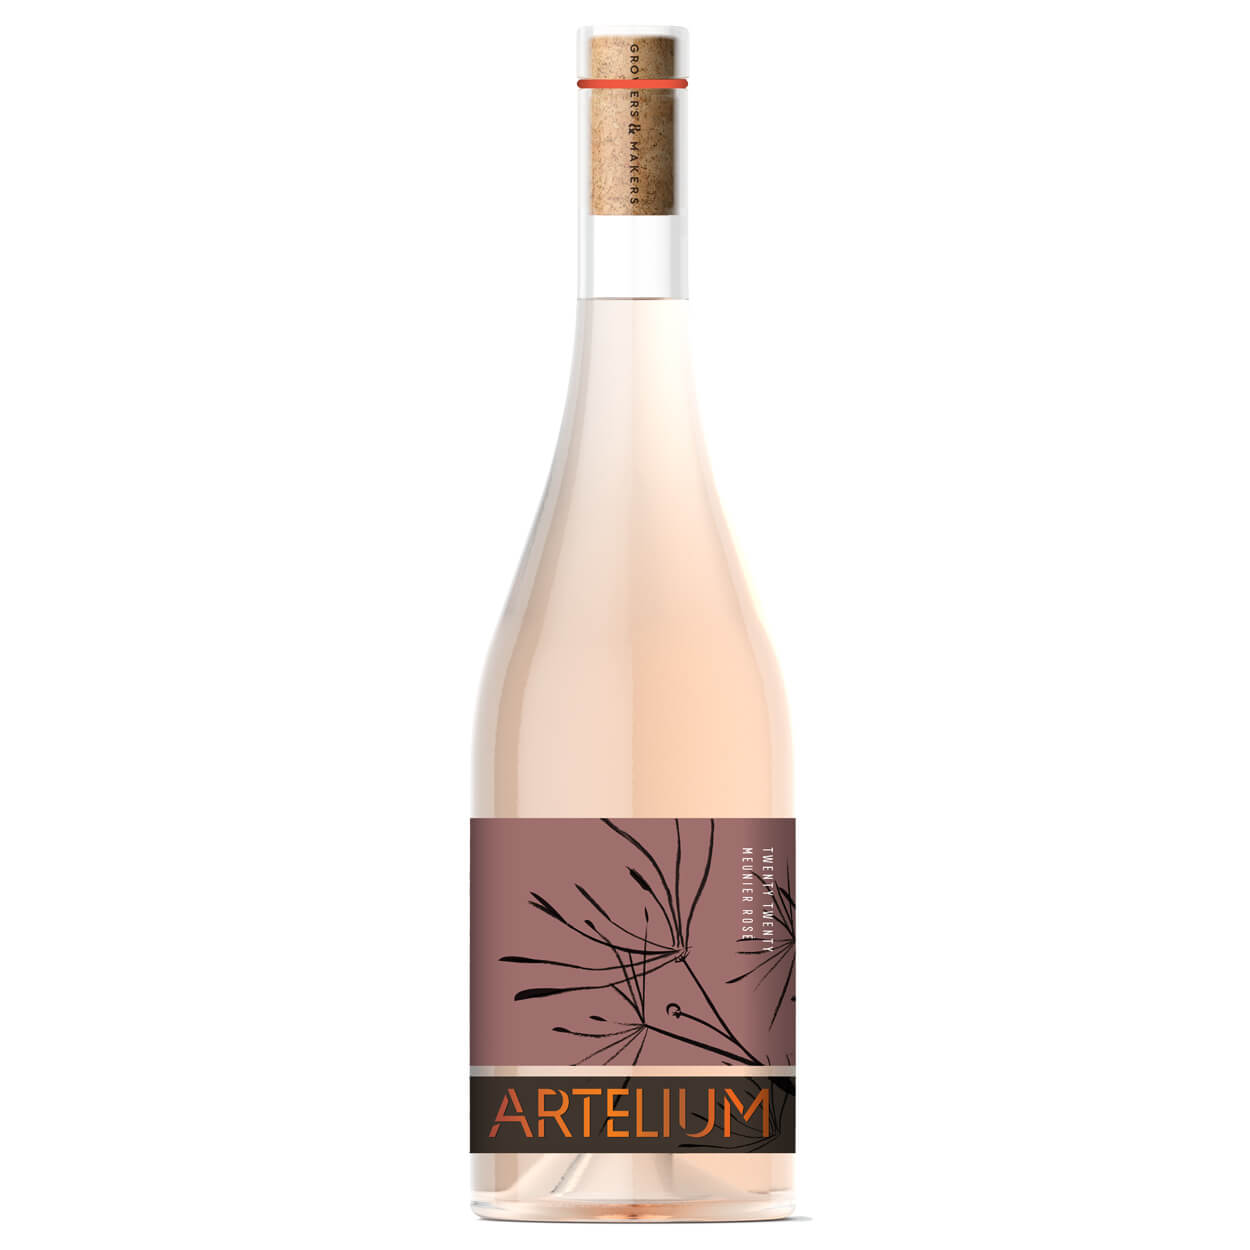 Artelium Meunier Rosé 2020 is crafted by renowned winemaker Owen Elias from Meunier grapes grown in West Sussex.